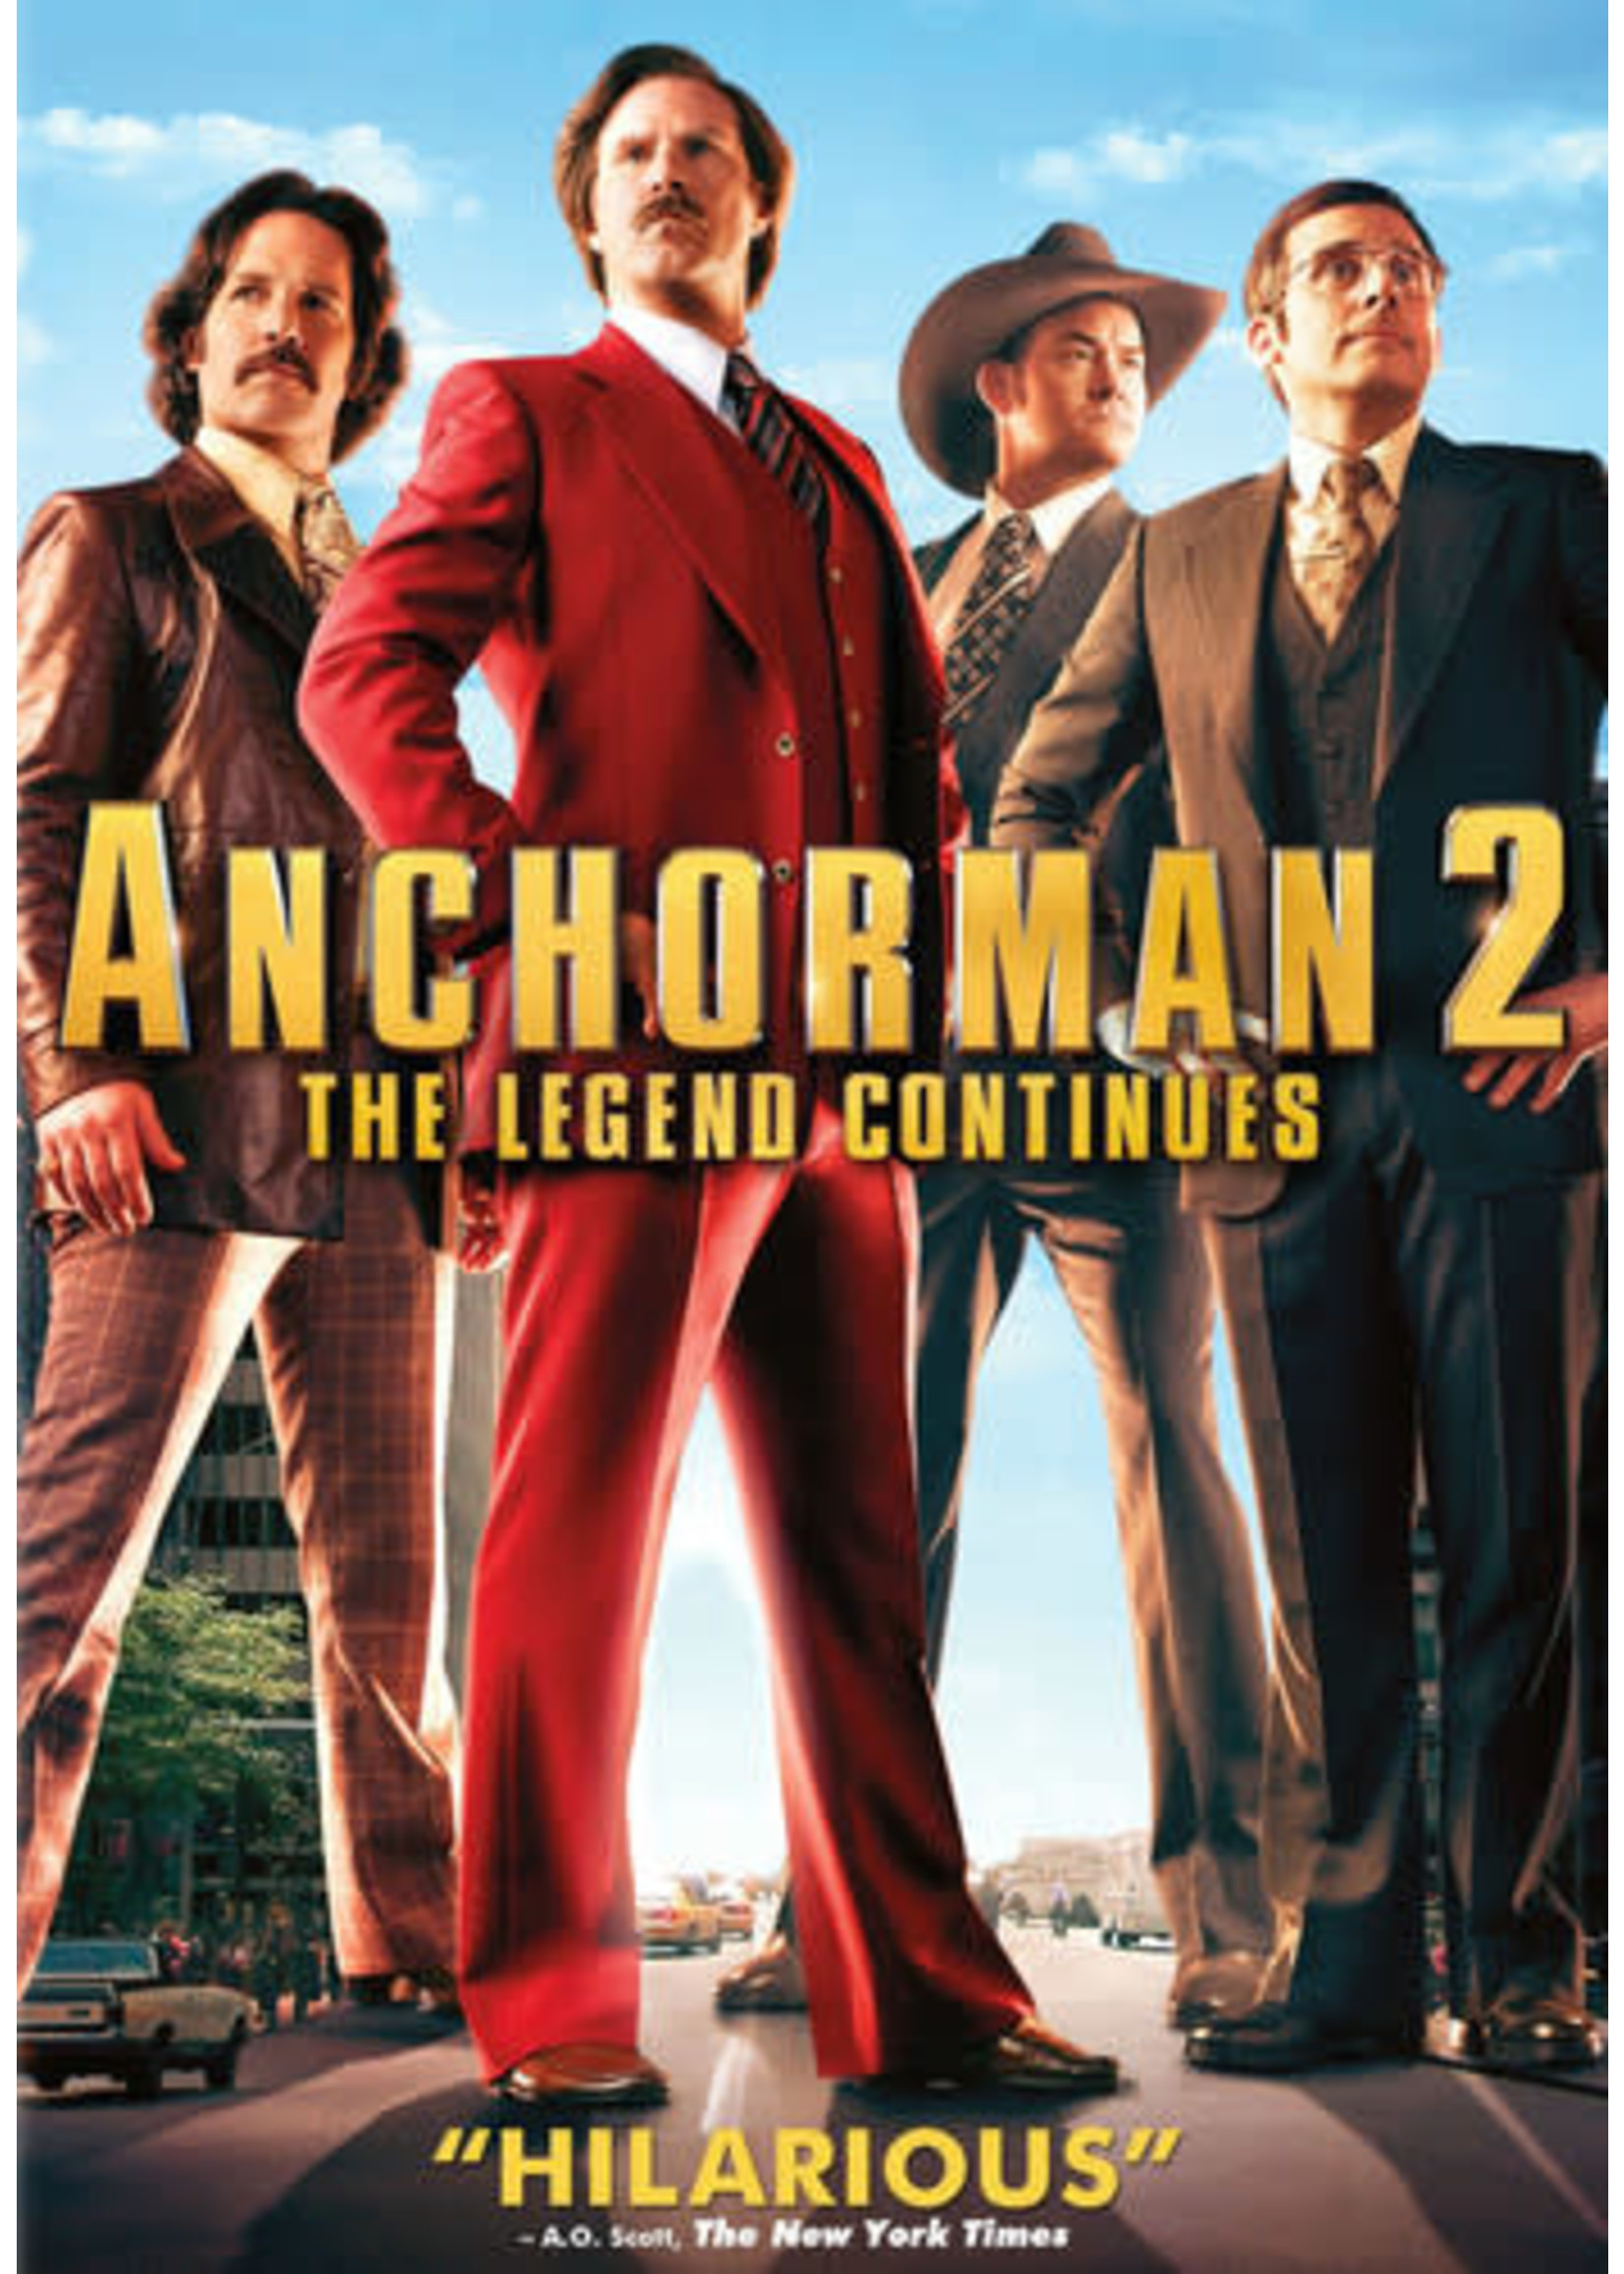 Anchorman 2: the Legend Continues DVD